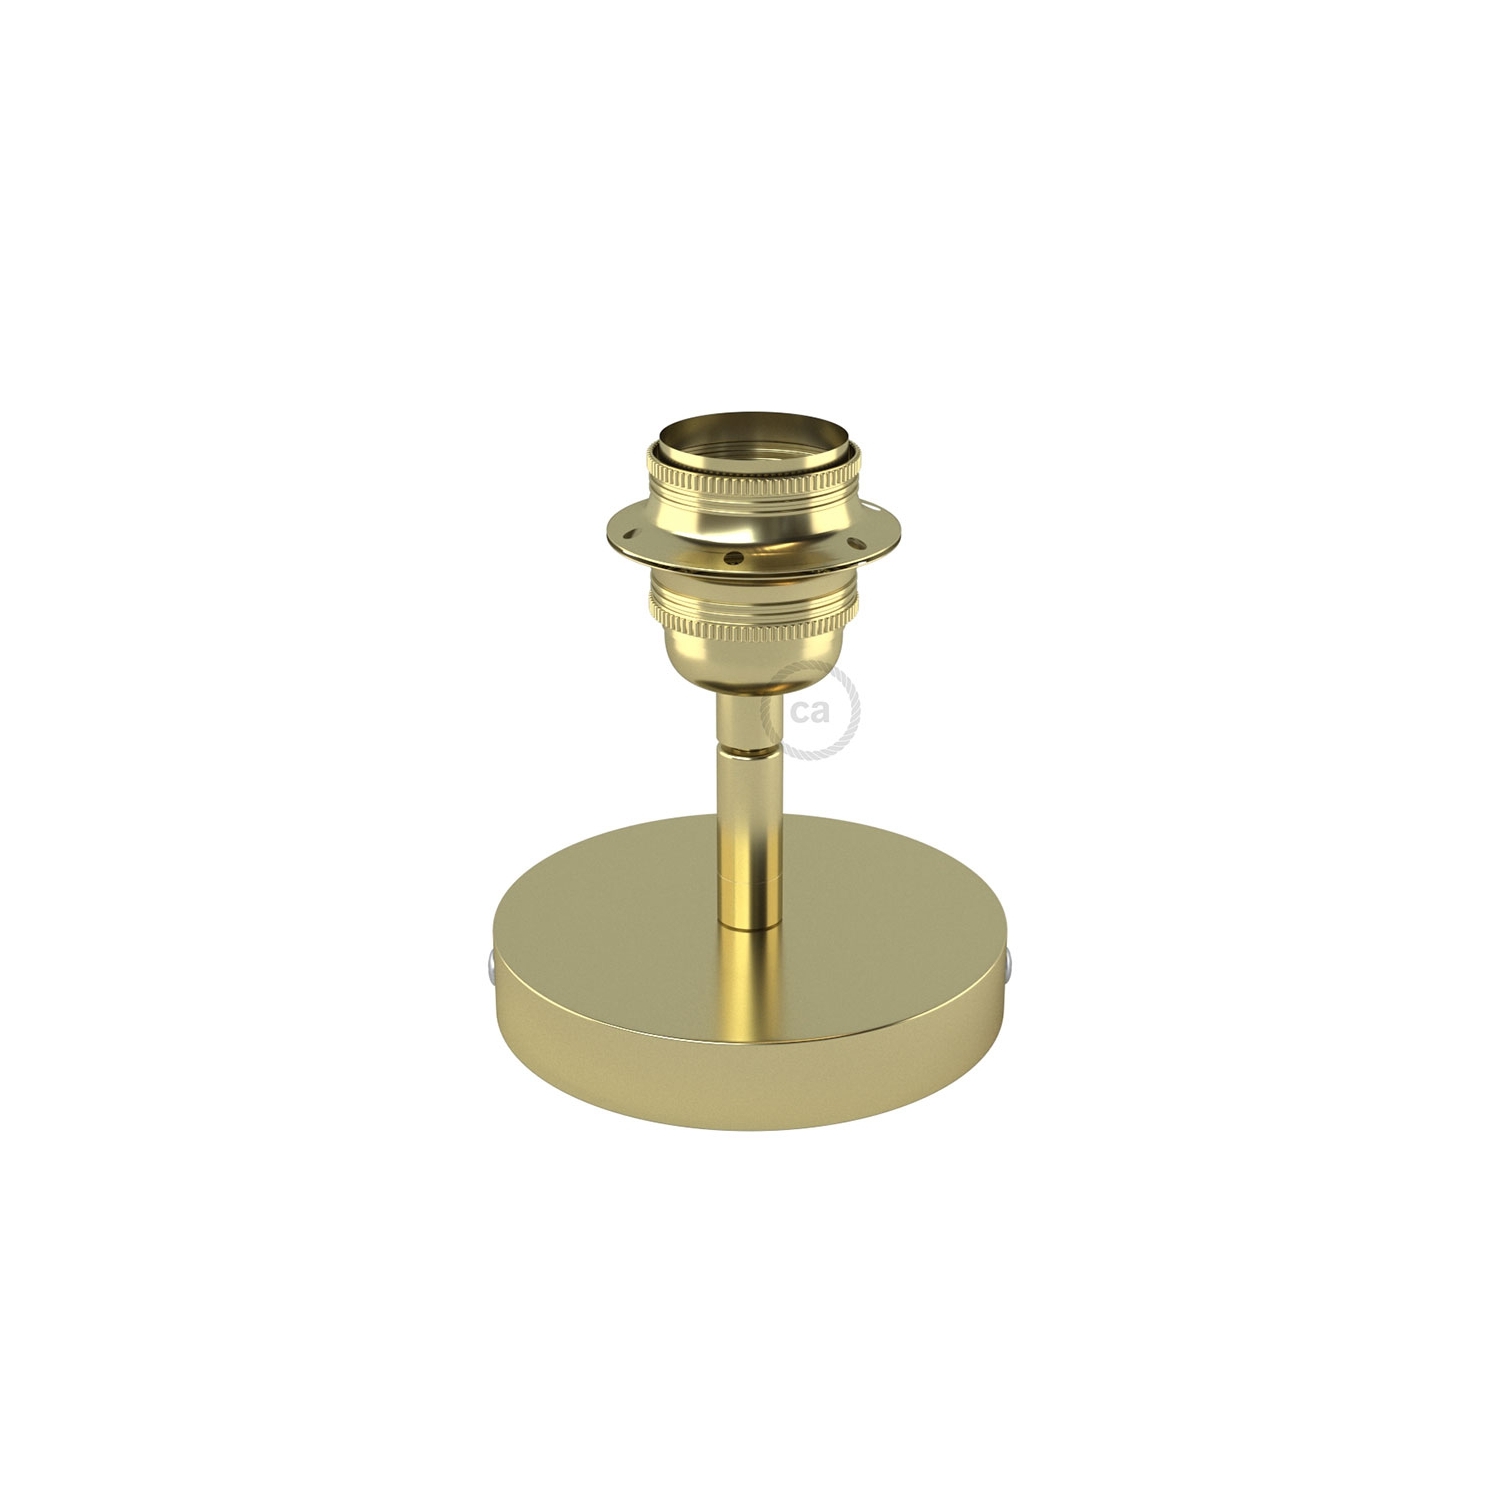 Fermaluce Metallo 90° Brass finish adjustable, with E26 threaded lamp holder, the metal wall or ceiling light source